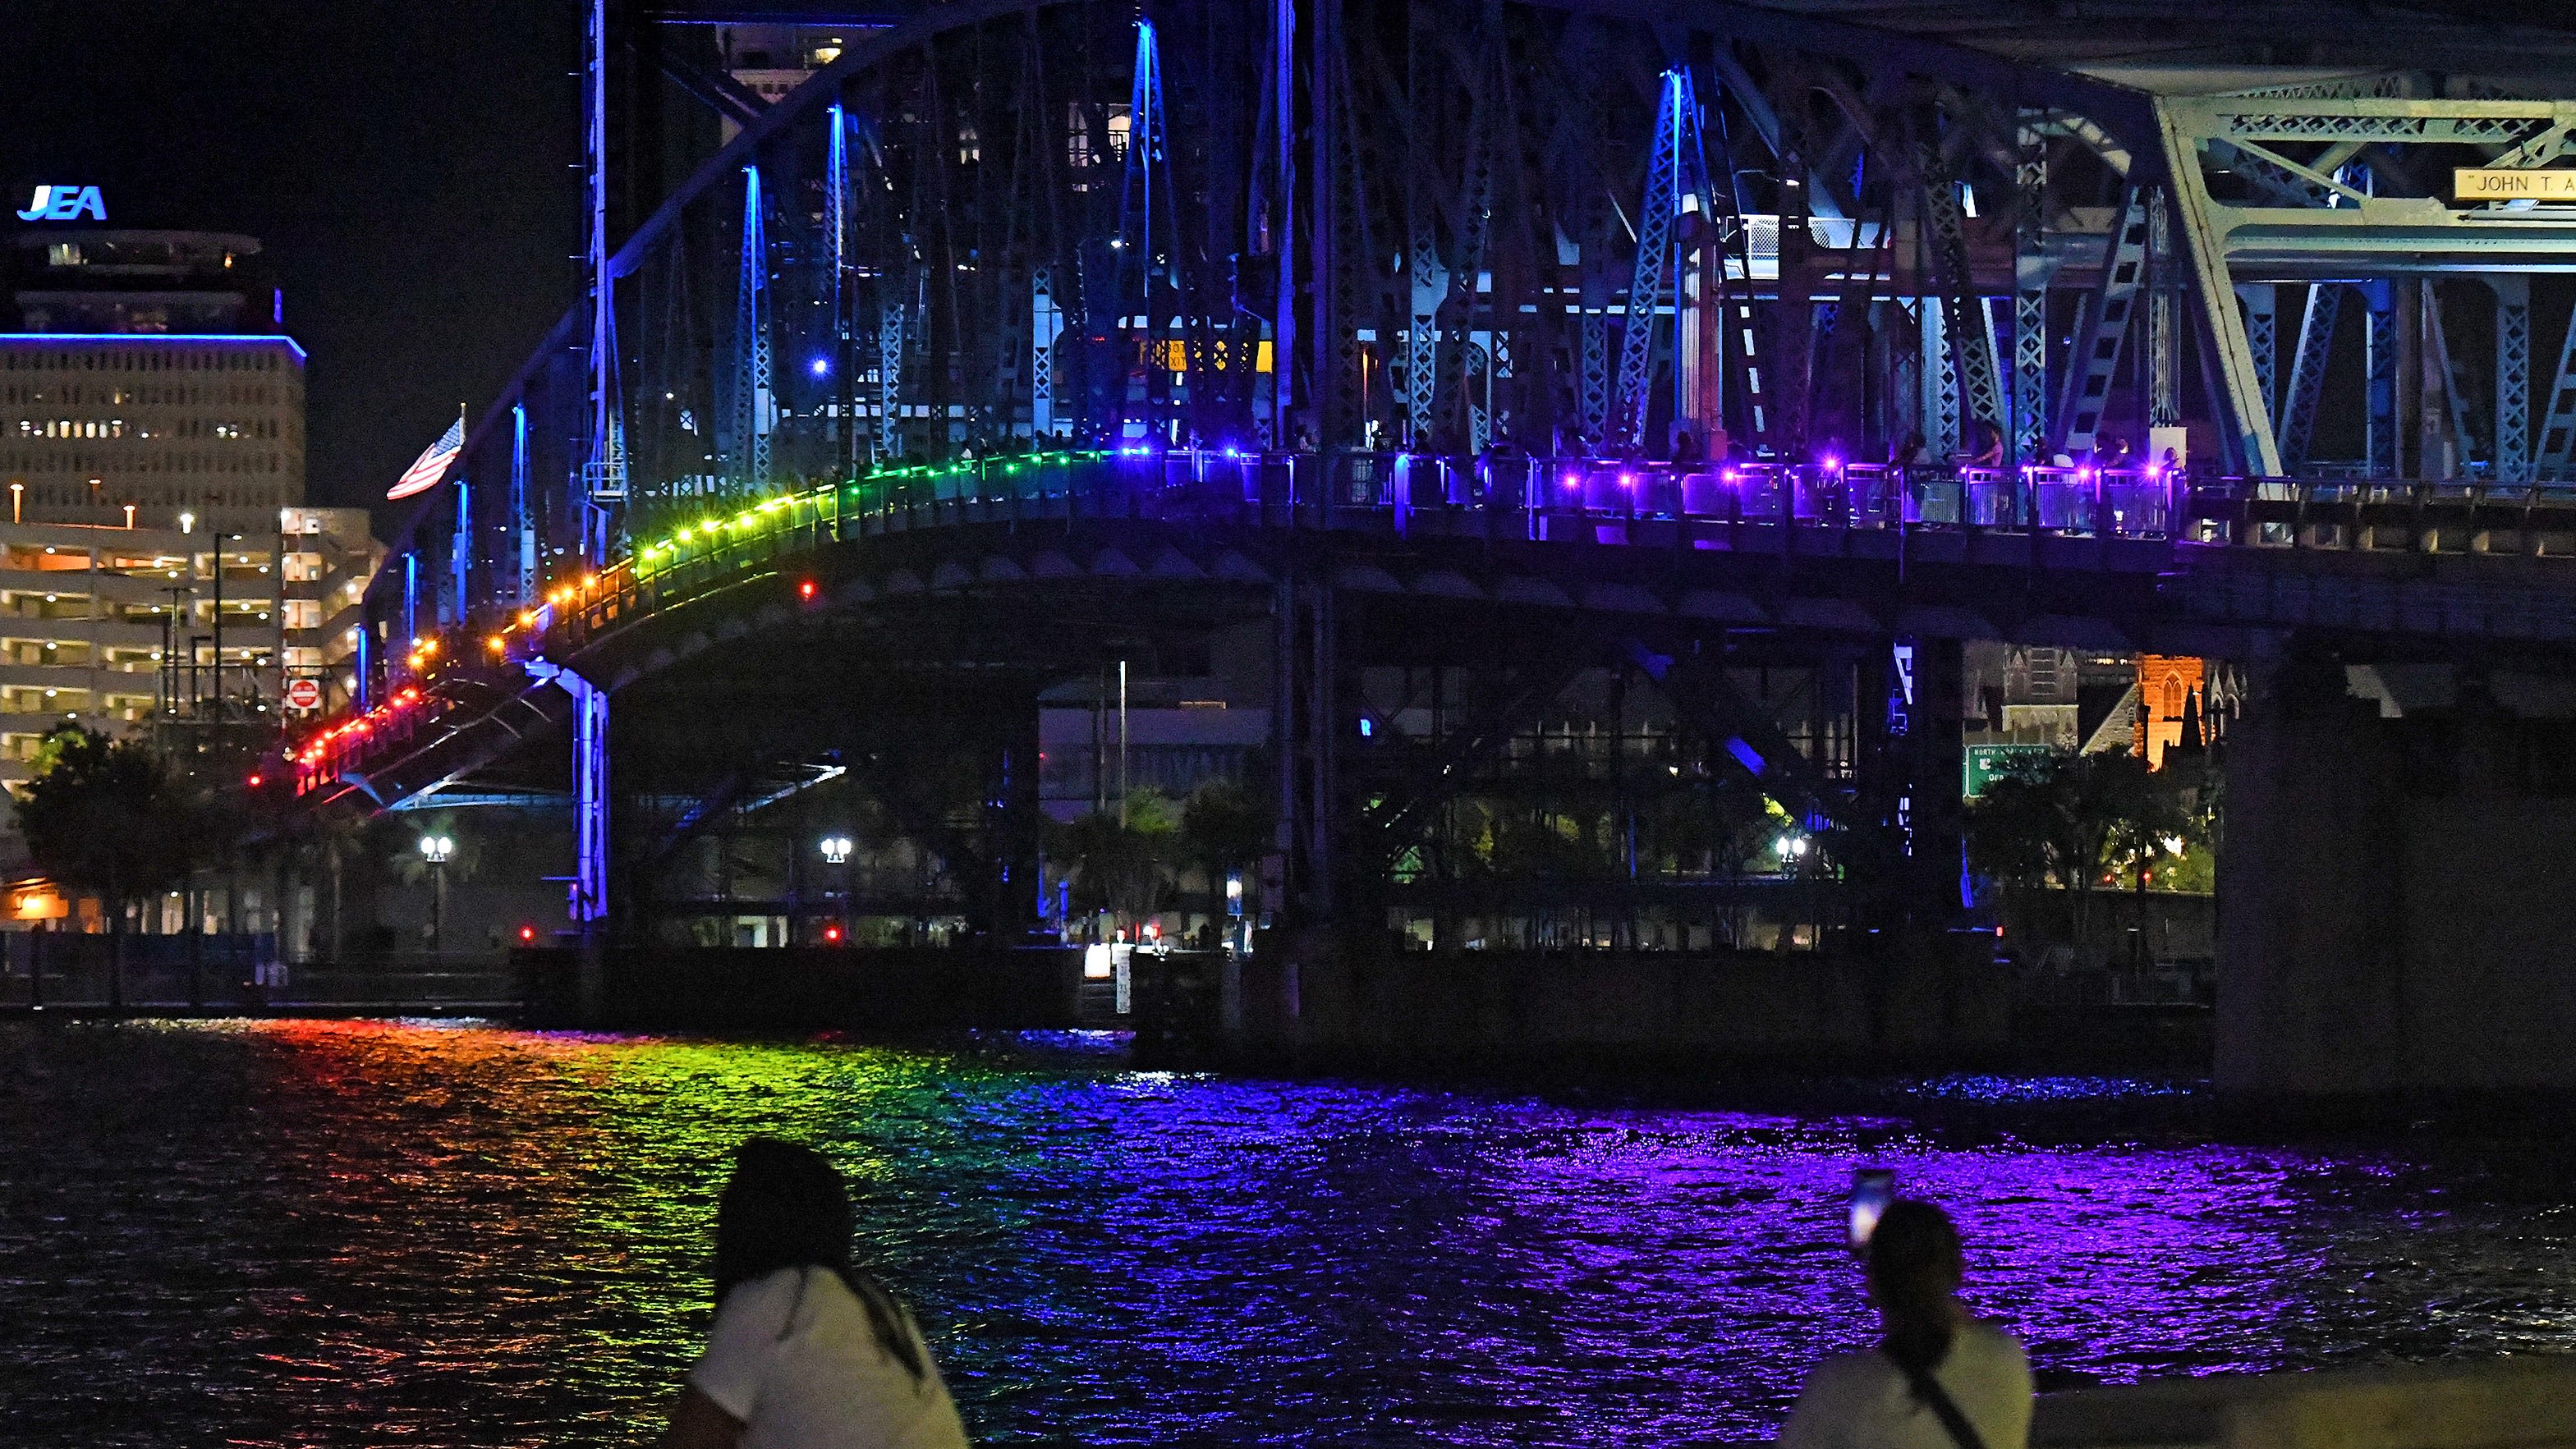 Rainbow colors lit the Main Street Bridge as a counter to Governor's lighting mandate